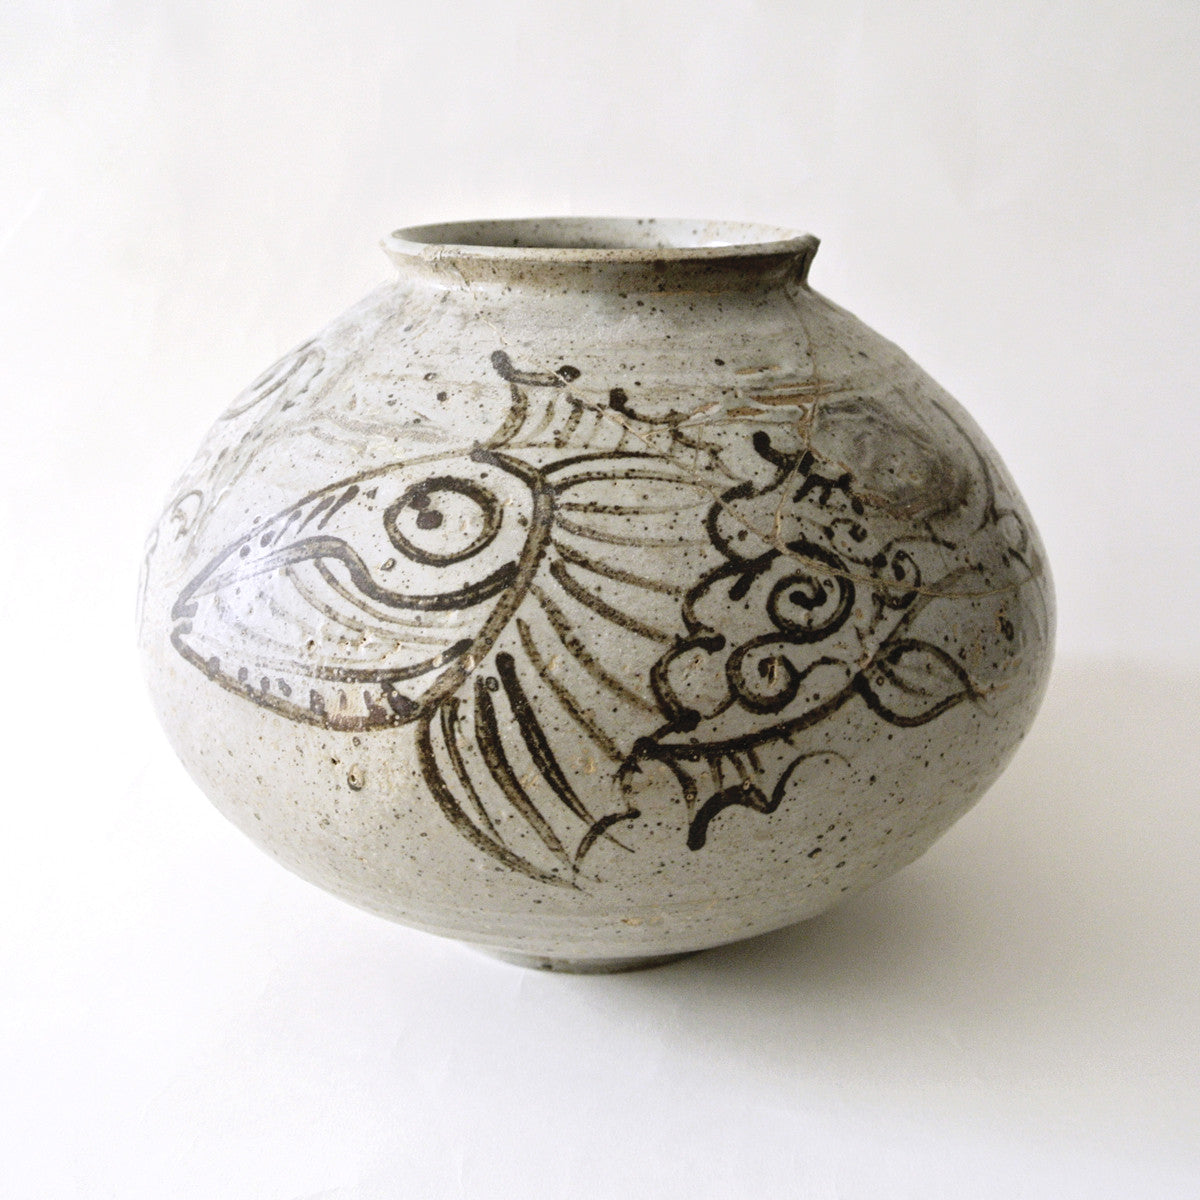 Korean Brown & White Vase with Fish and Seaweed Design from Chosun Period